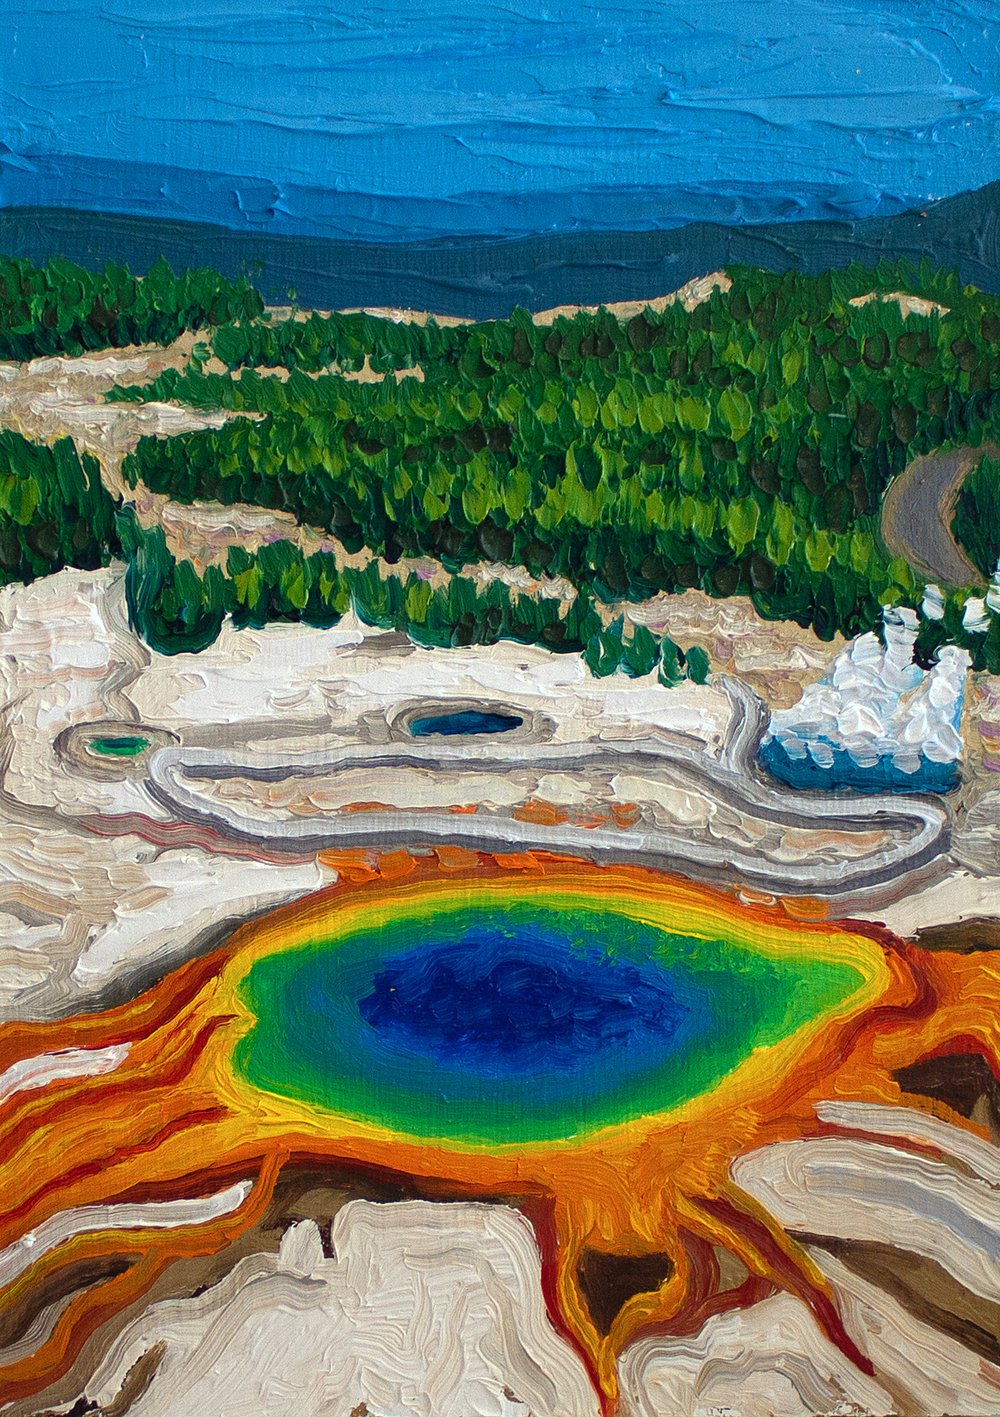 Yellowstone National Park (7 x 5 inches)